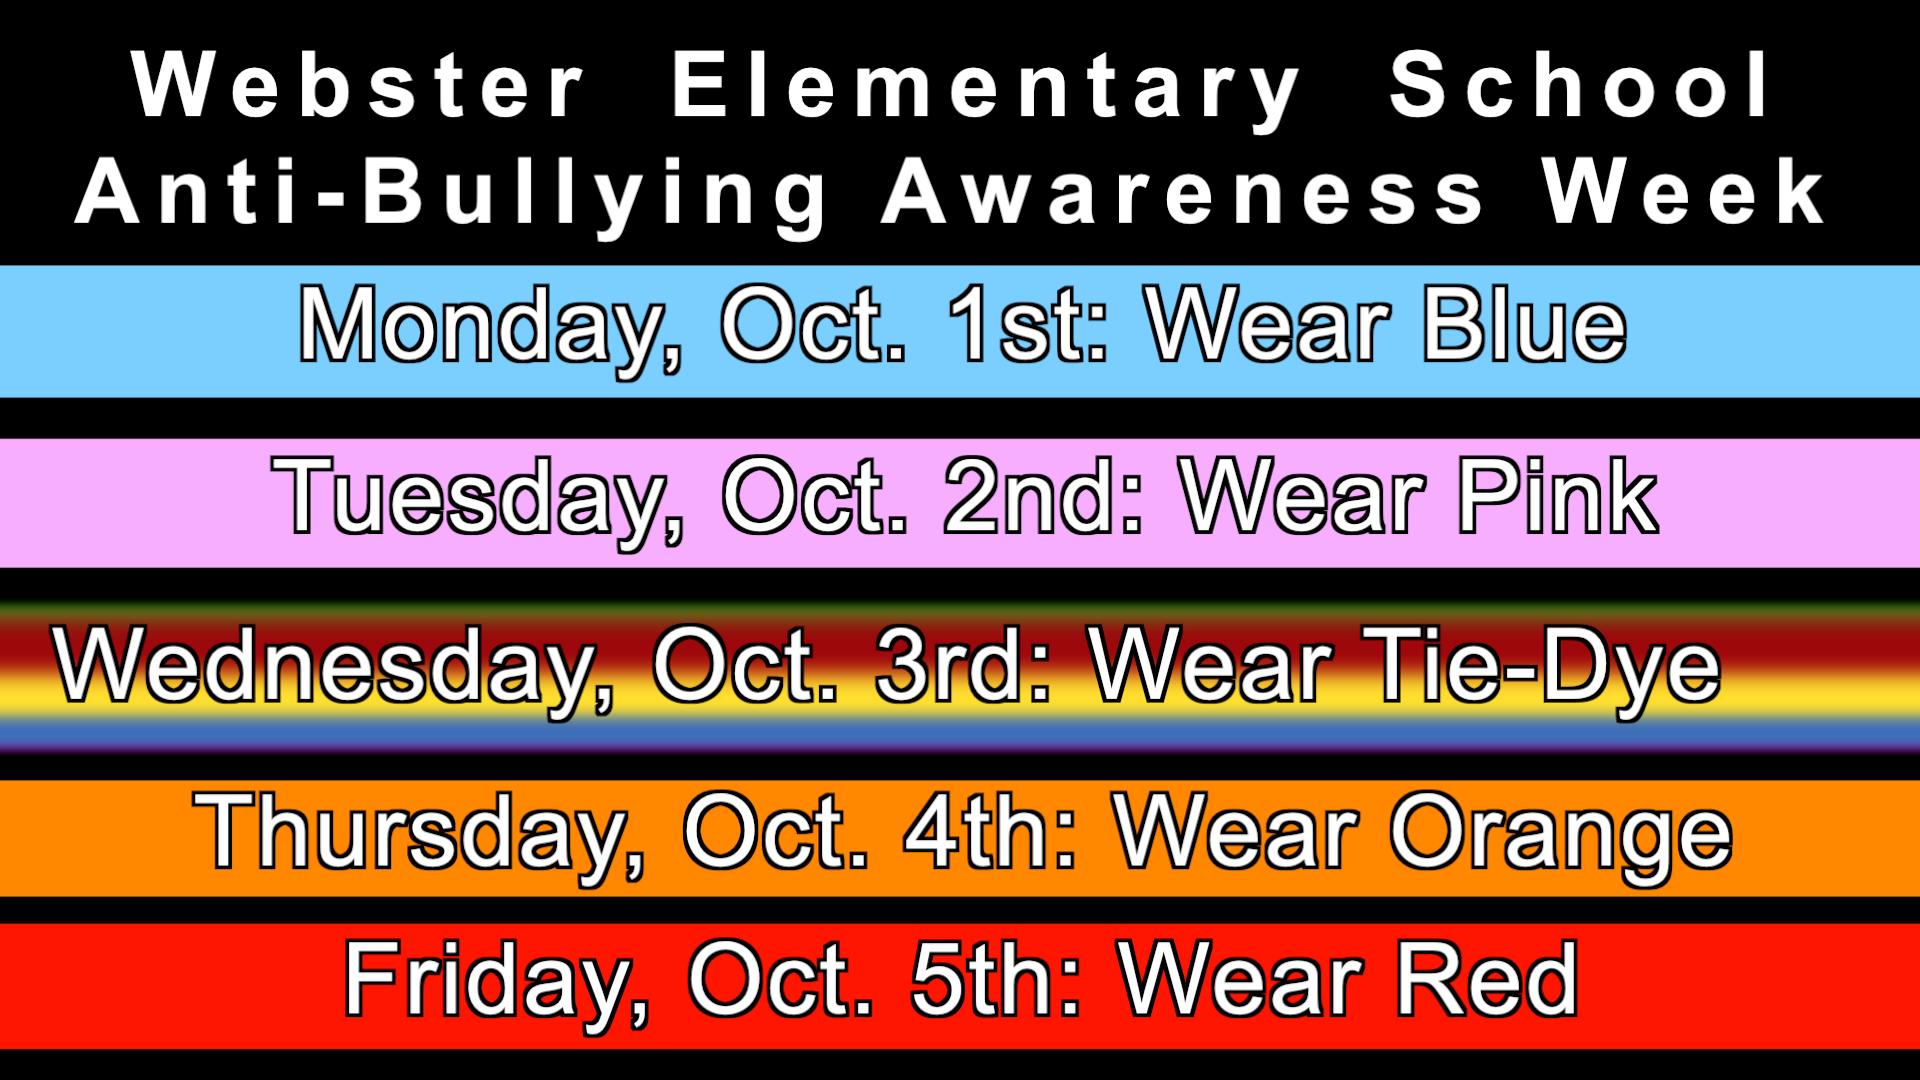 Webster Elementary School Anti-Bullying Awareness Week. Monday, October 1 wear blue; Tuesday, October 2 wear pink; Wednesday, October 3 wear tie-dye; Thursday, October 4 wear orange; Friday, October 5 wear red